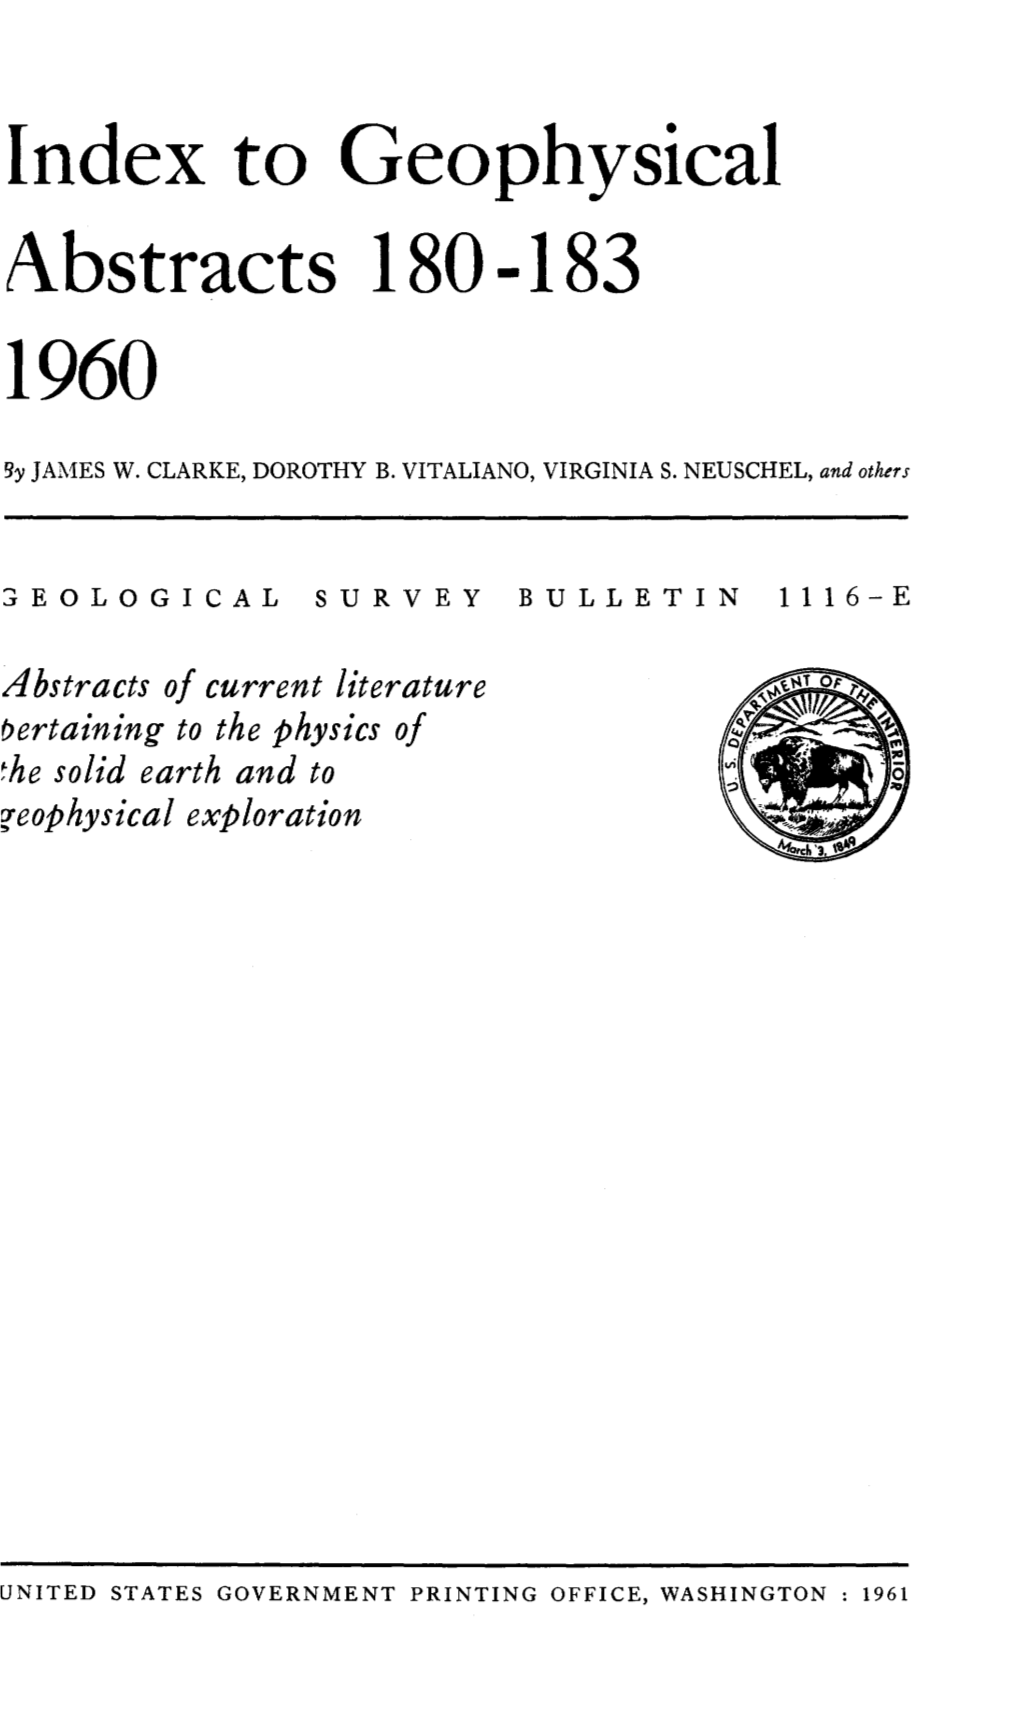 Index to Geophysical Abstracts 180-183 1960